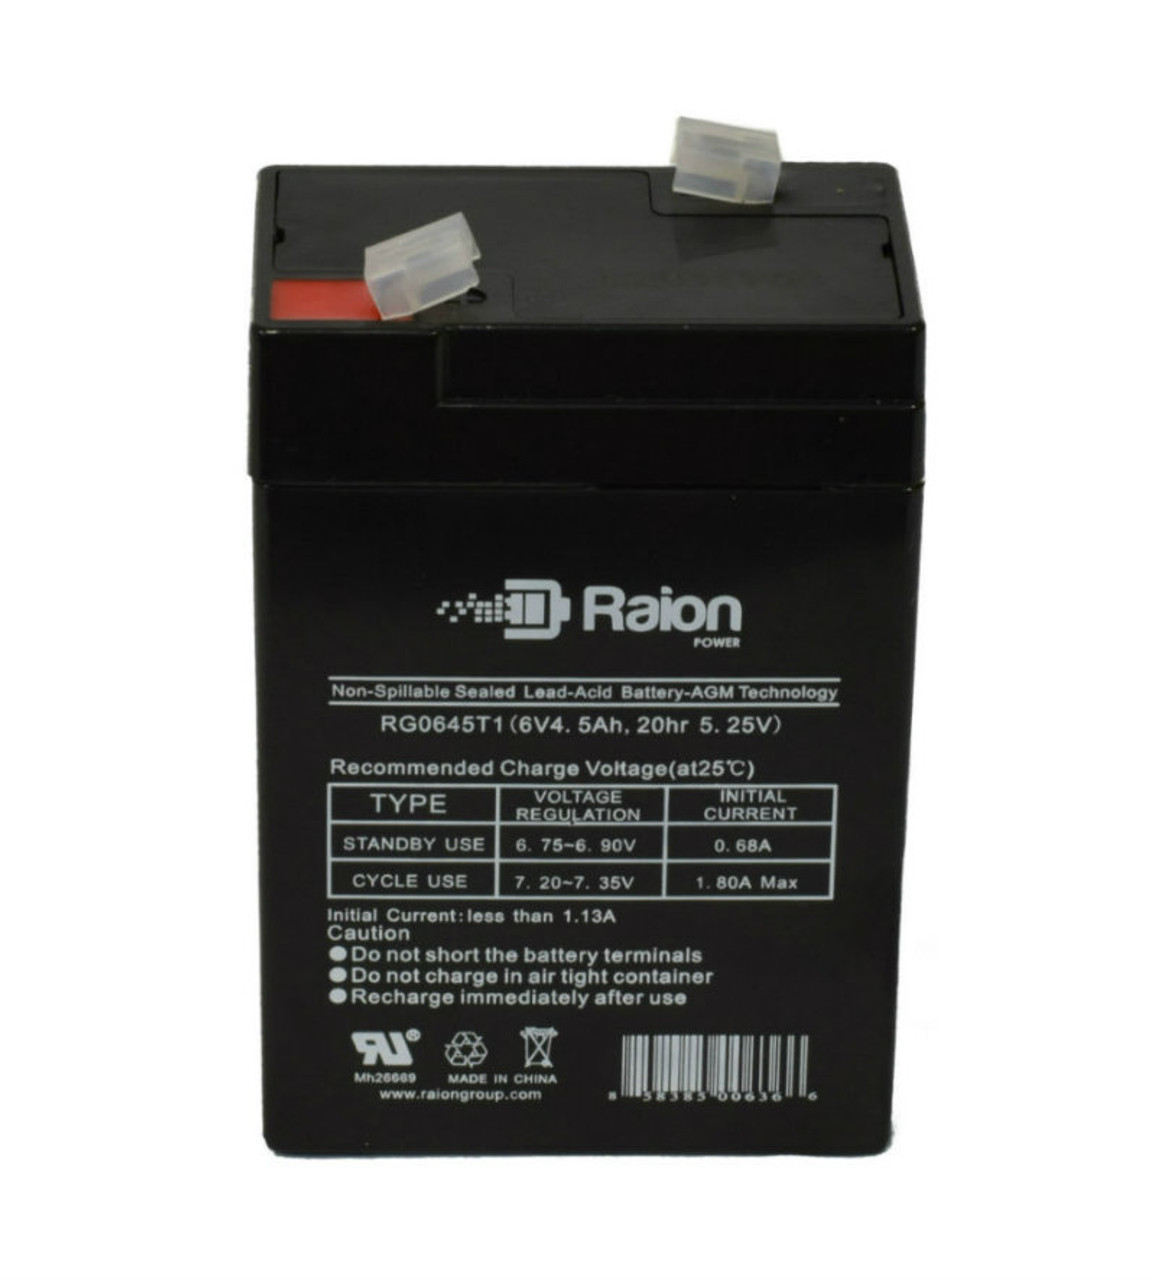 Raion Power RG0645T1 Replacement Battery Cartridge for Sure-way 1003